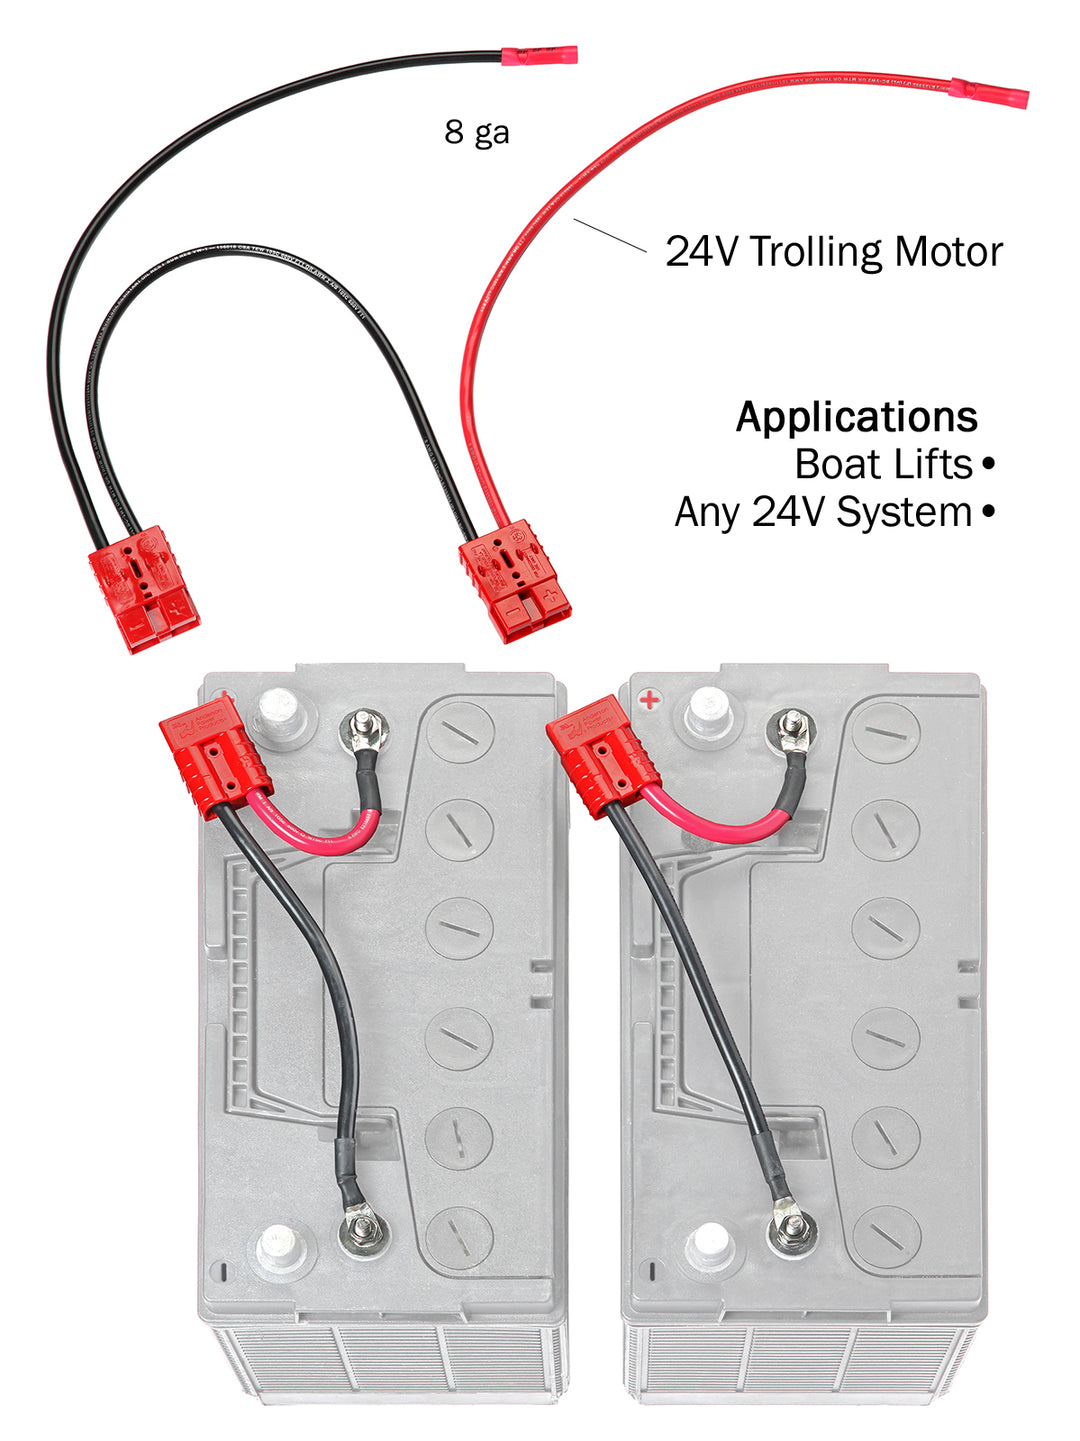 24 Volt Trolling Motor Connection Kit (with out On-Board Charging) (RCE24VBK) - Connect-Ease. Connect all your marine equipment with ease.